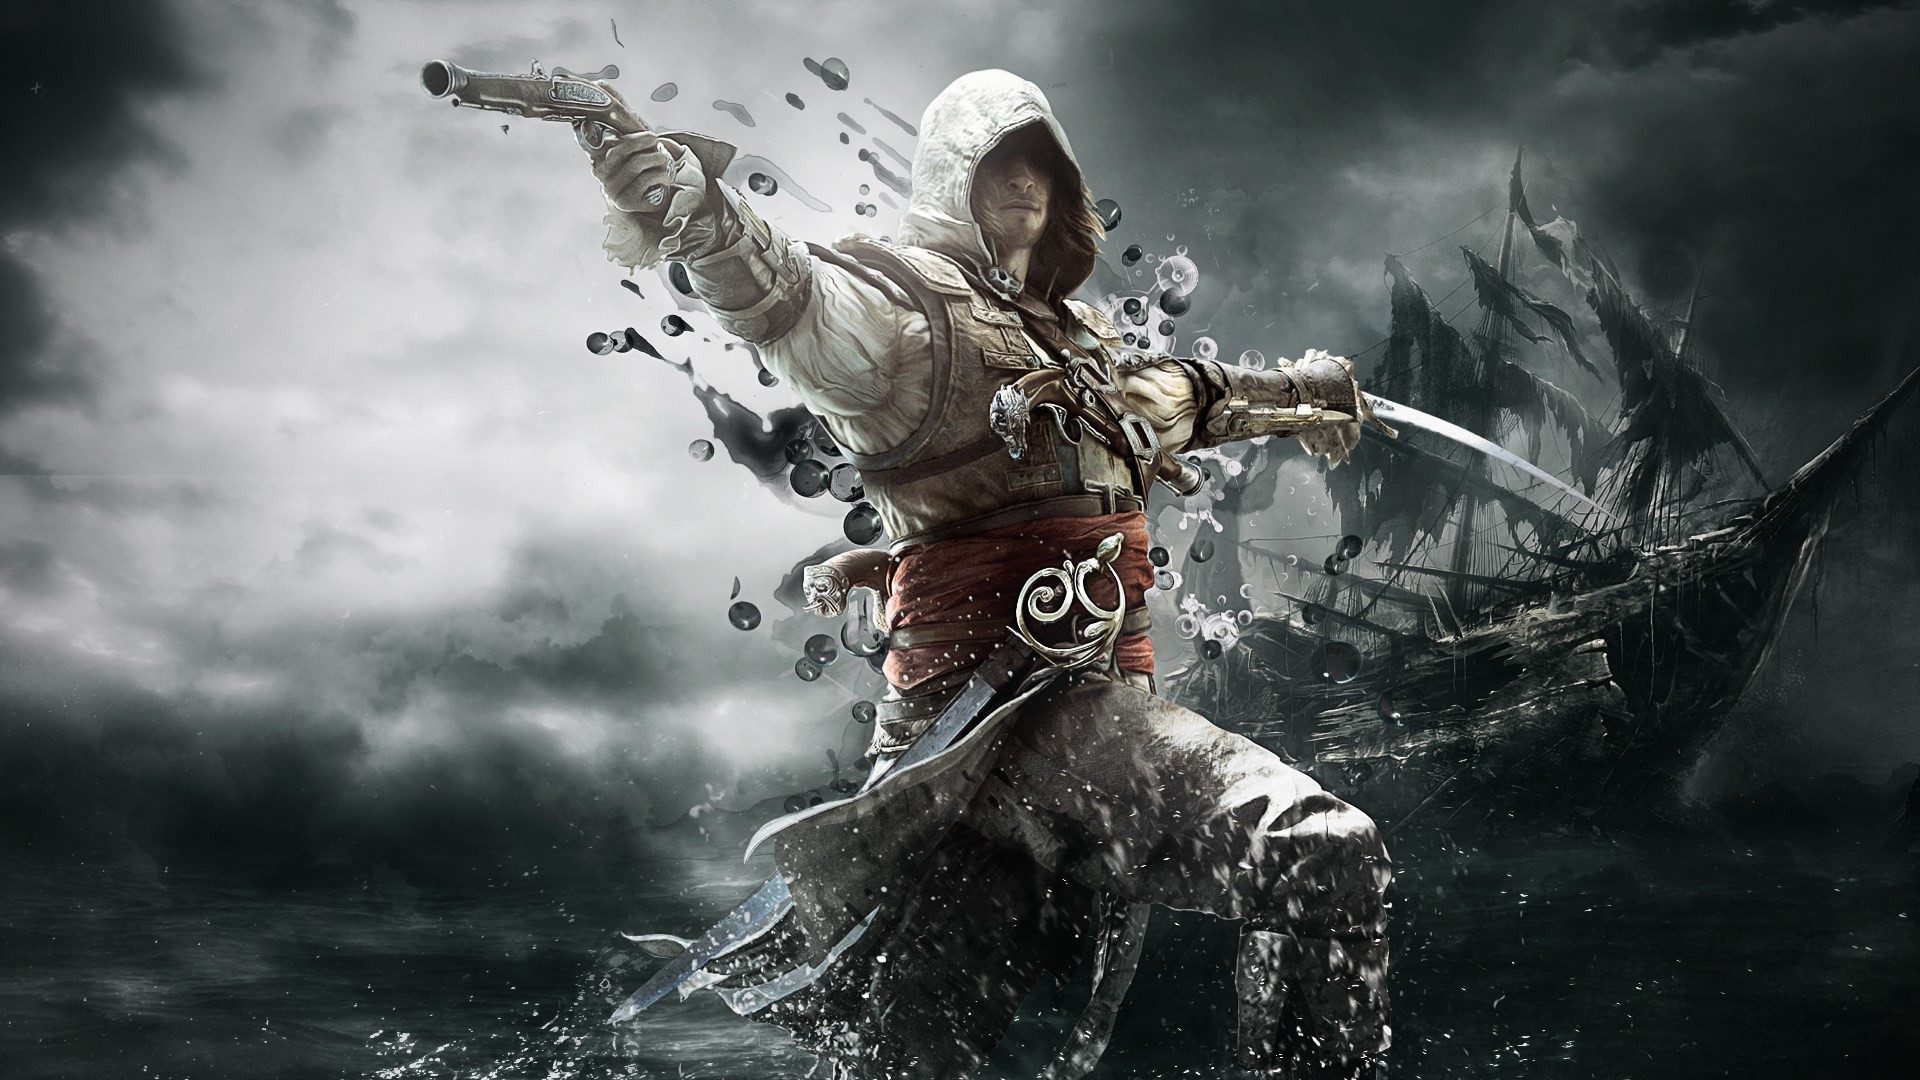 1920x1080 Assassin's Creed 4 Black Flag Exclusive HD Wallpapers #2408